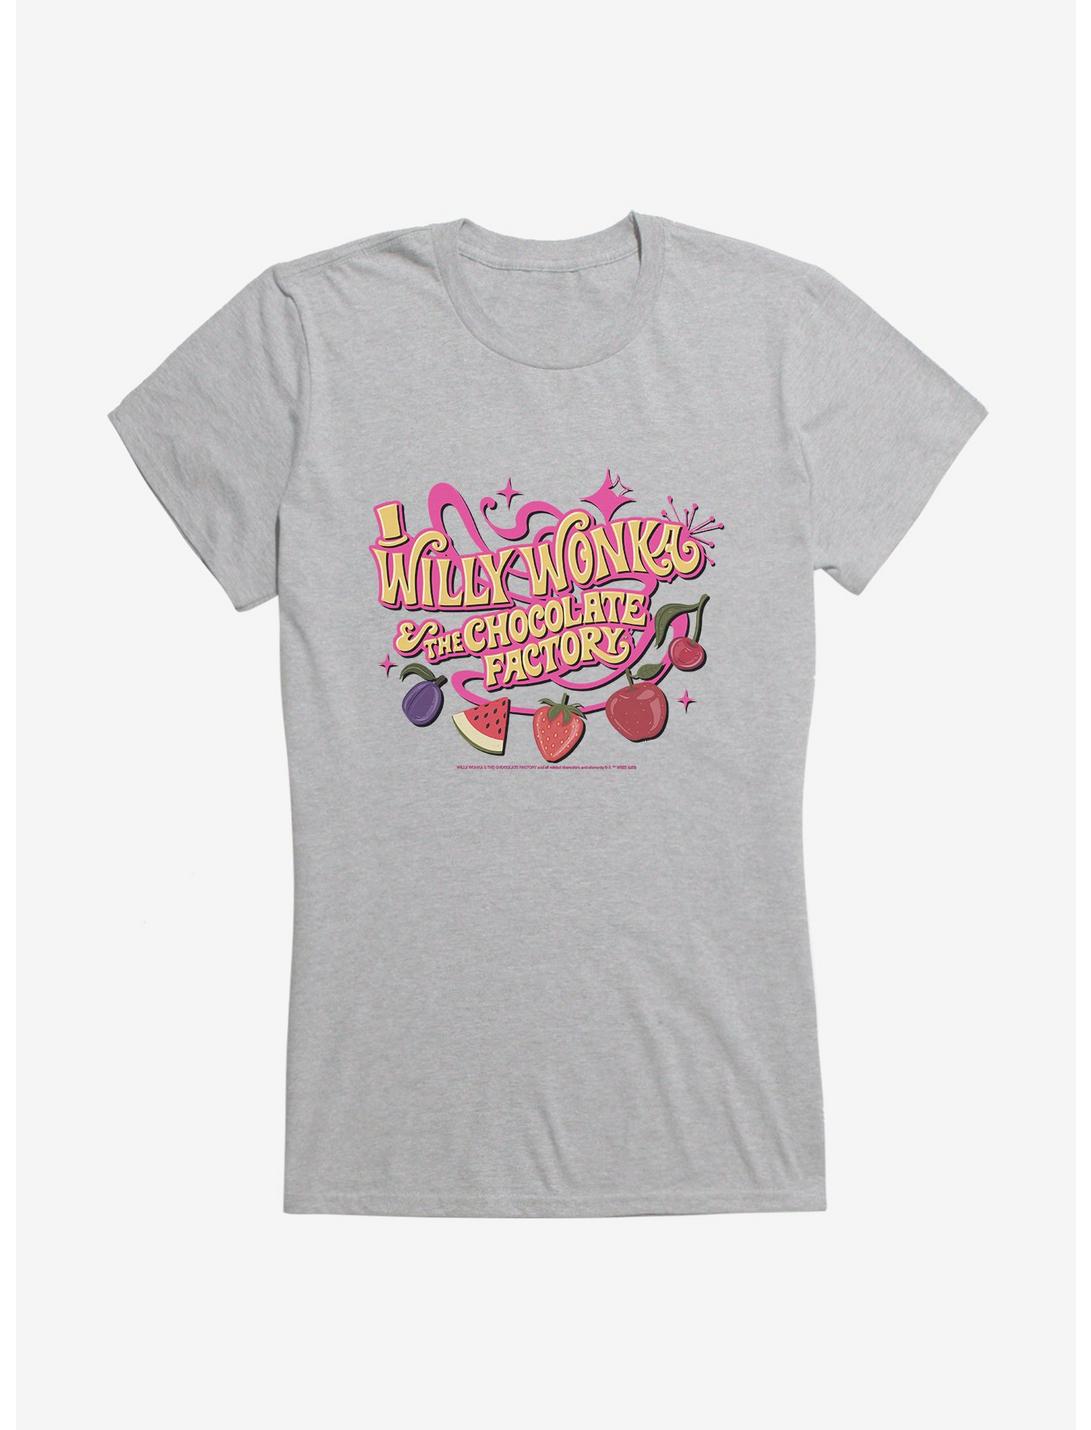 Willy Wonka And The Chocolate Factory Snozzberries Taste Like Snozzberries Girls T-Shirt, , hi-res